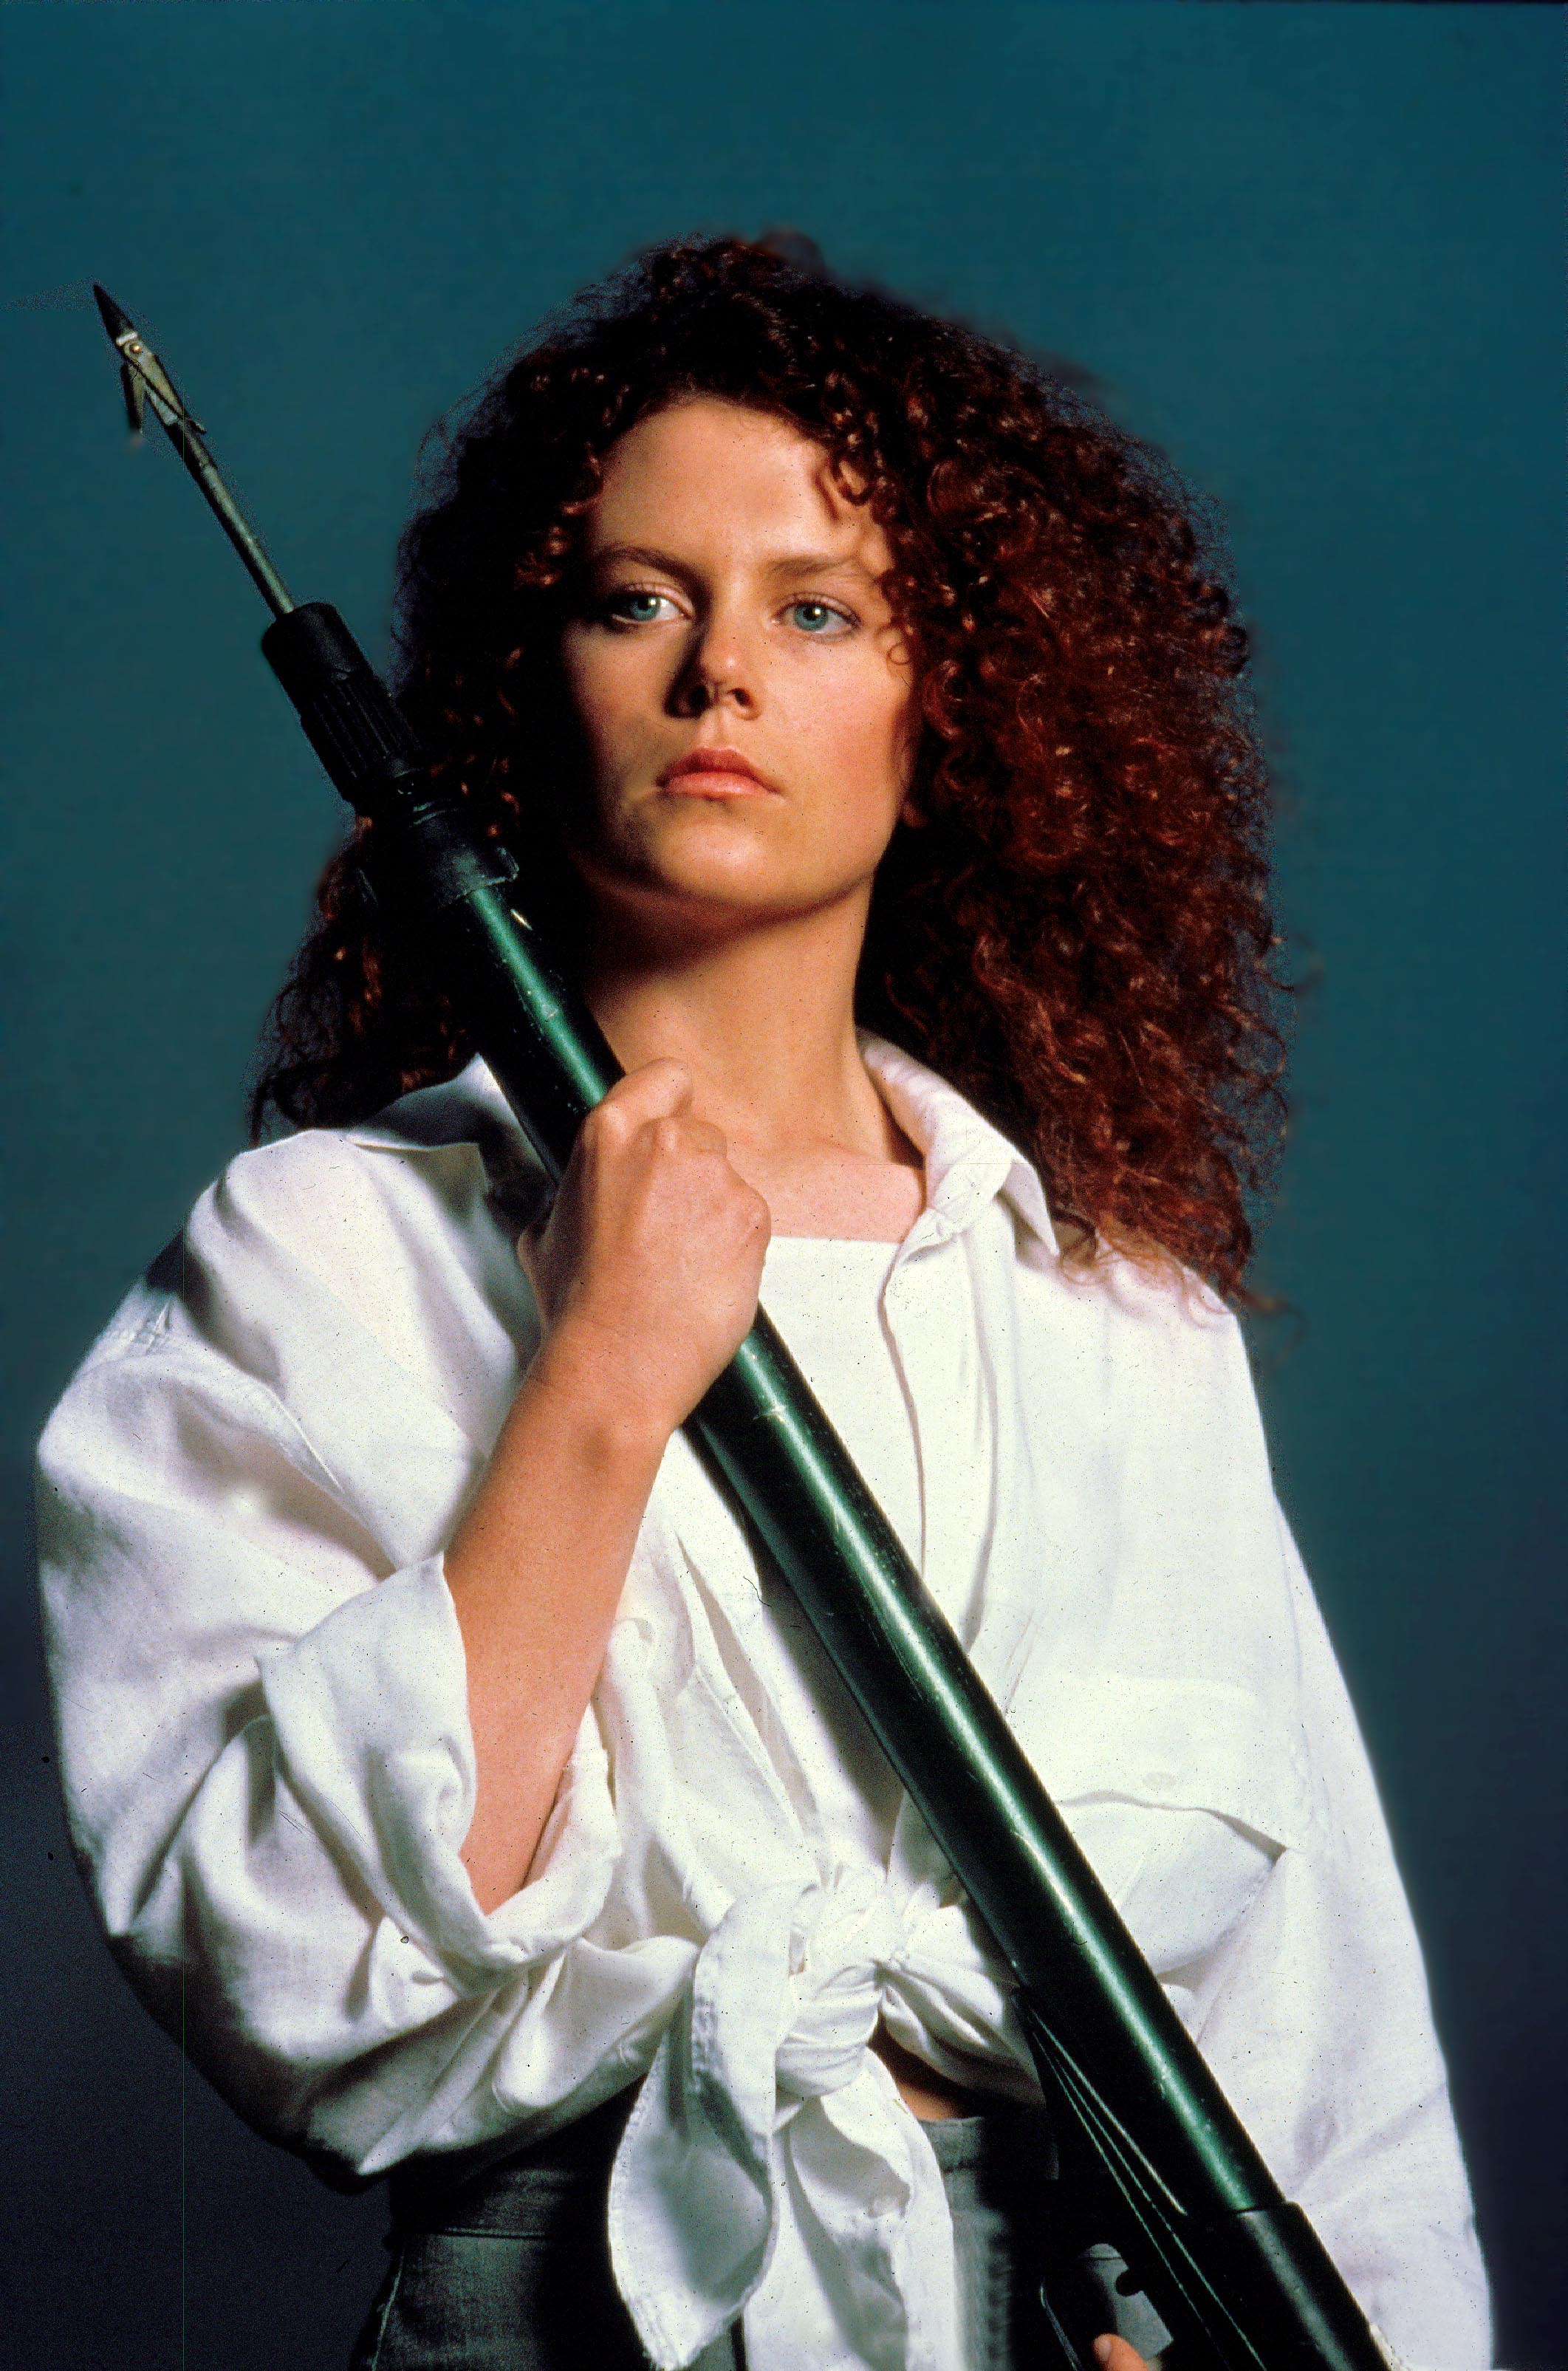 <p>We hardly recognize <a href="https://www.wonderwall.com/celebrity/profiles/overview/nicole-kidman-364.article">Nicole Kidman</a> in this still from the 1989 film "Dead Calm."</p>